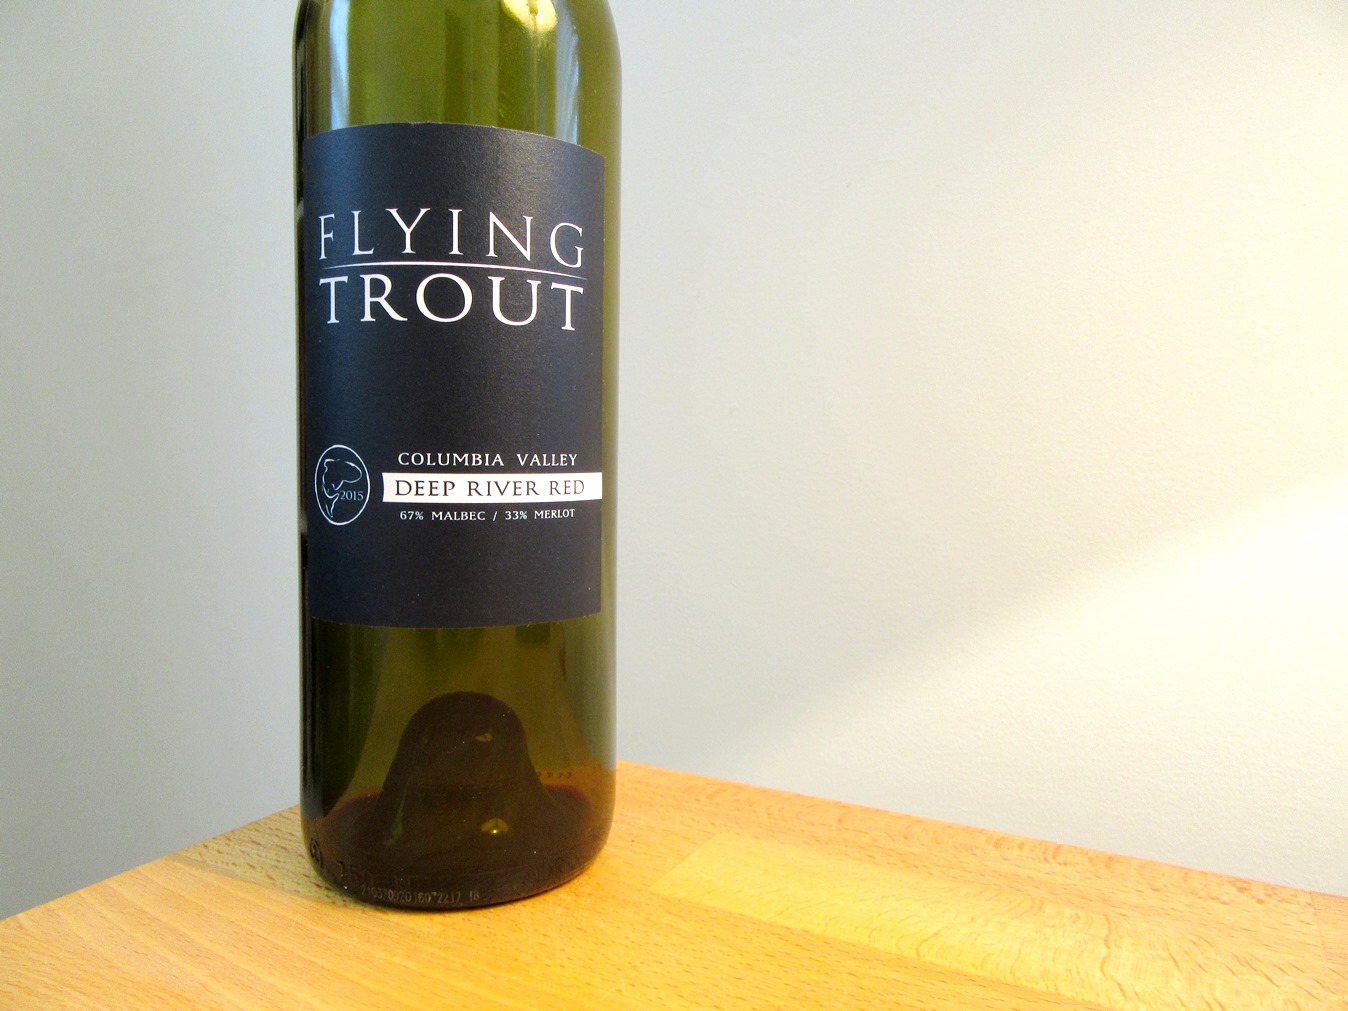 Flying Trout, Deep River Red 2015, Columbia Valley, Washington, Wine Casual